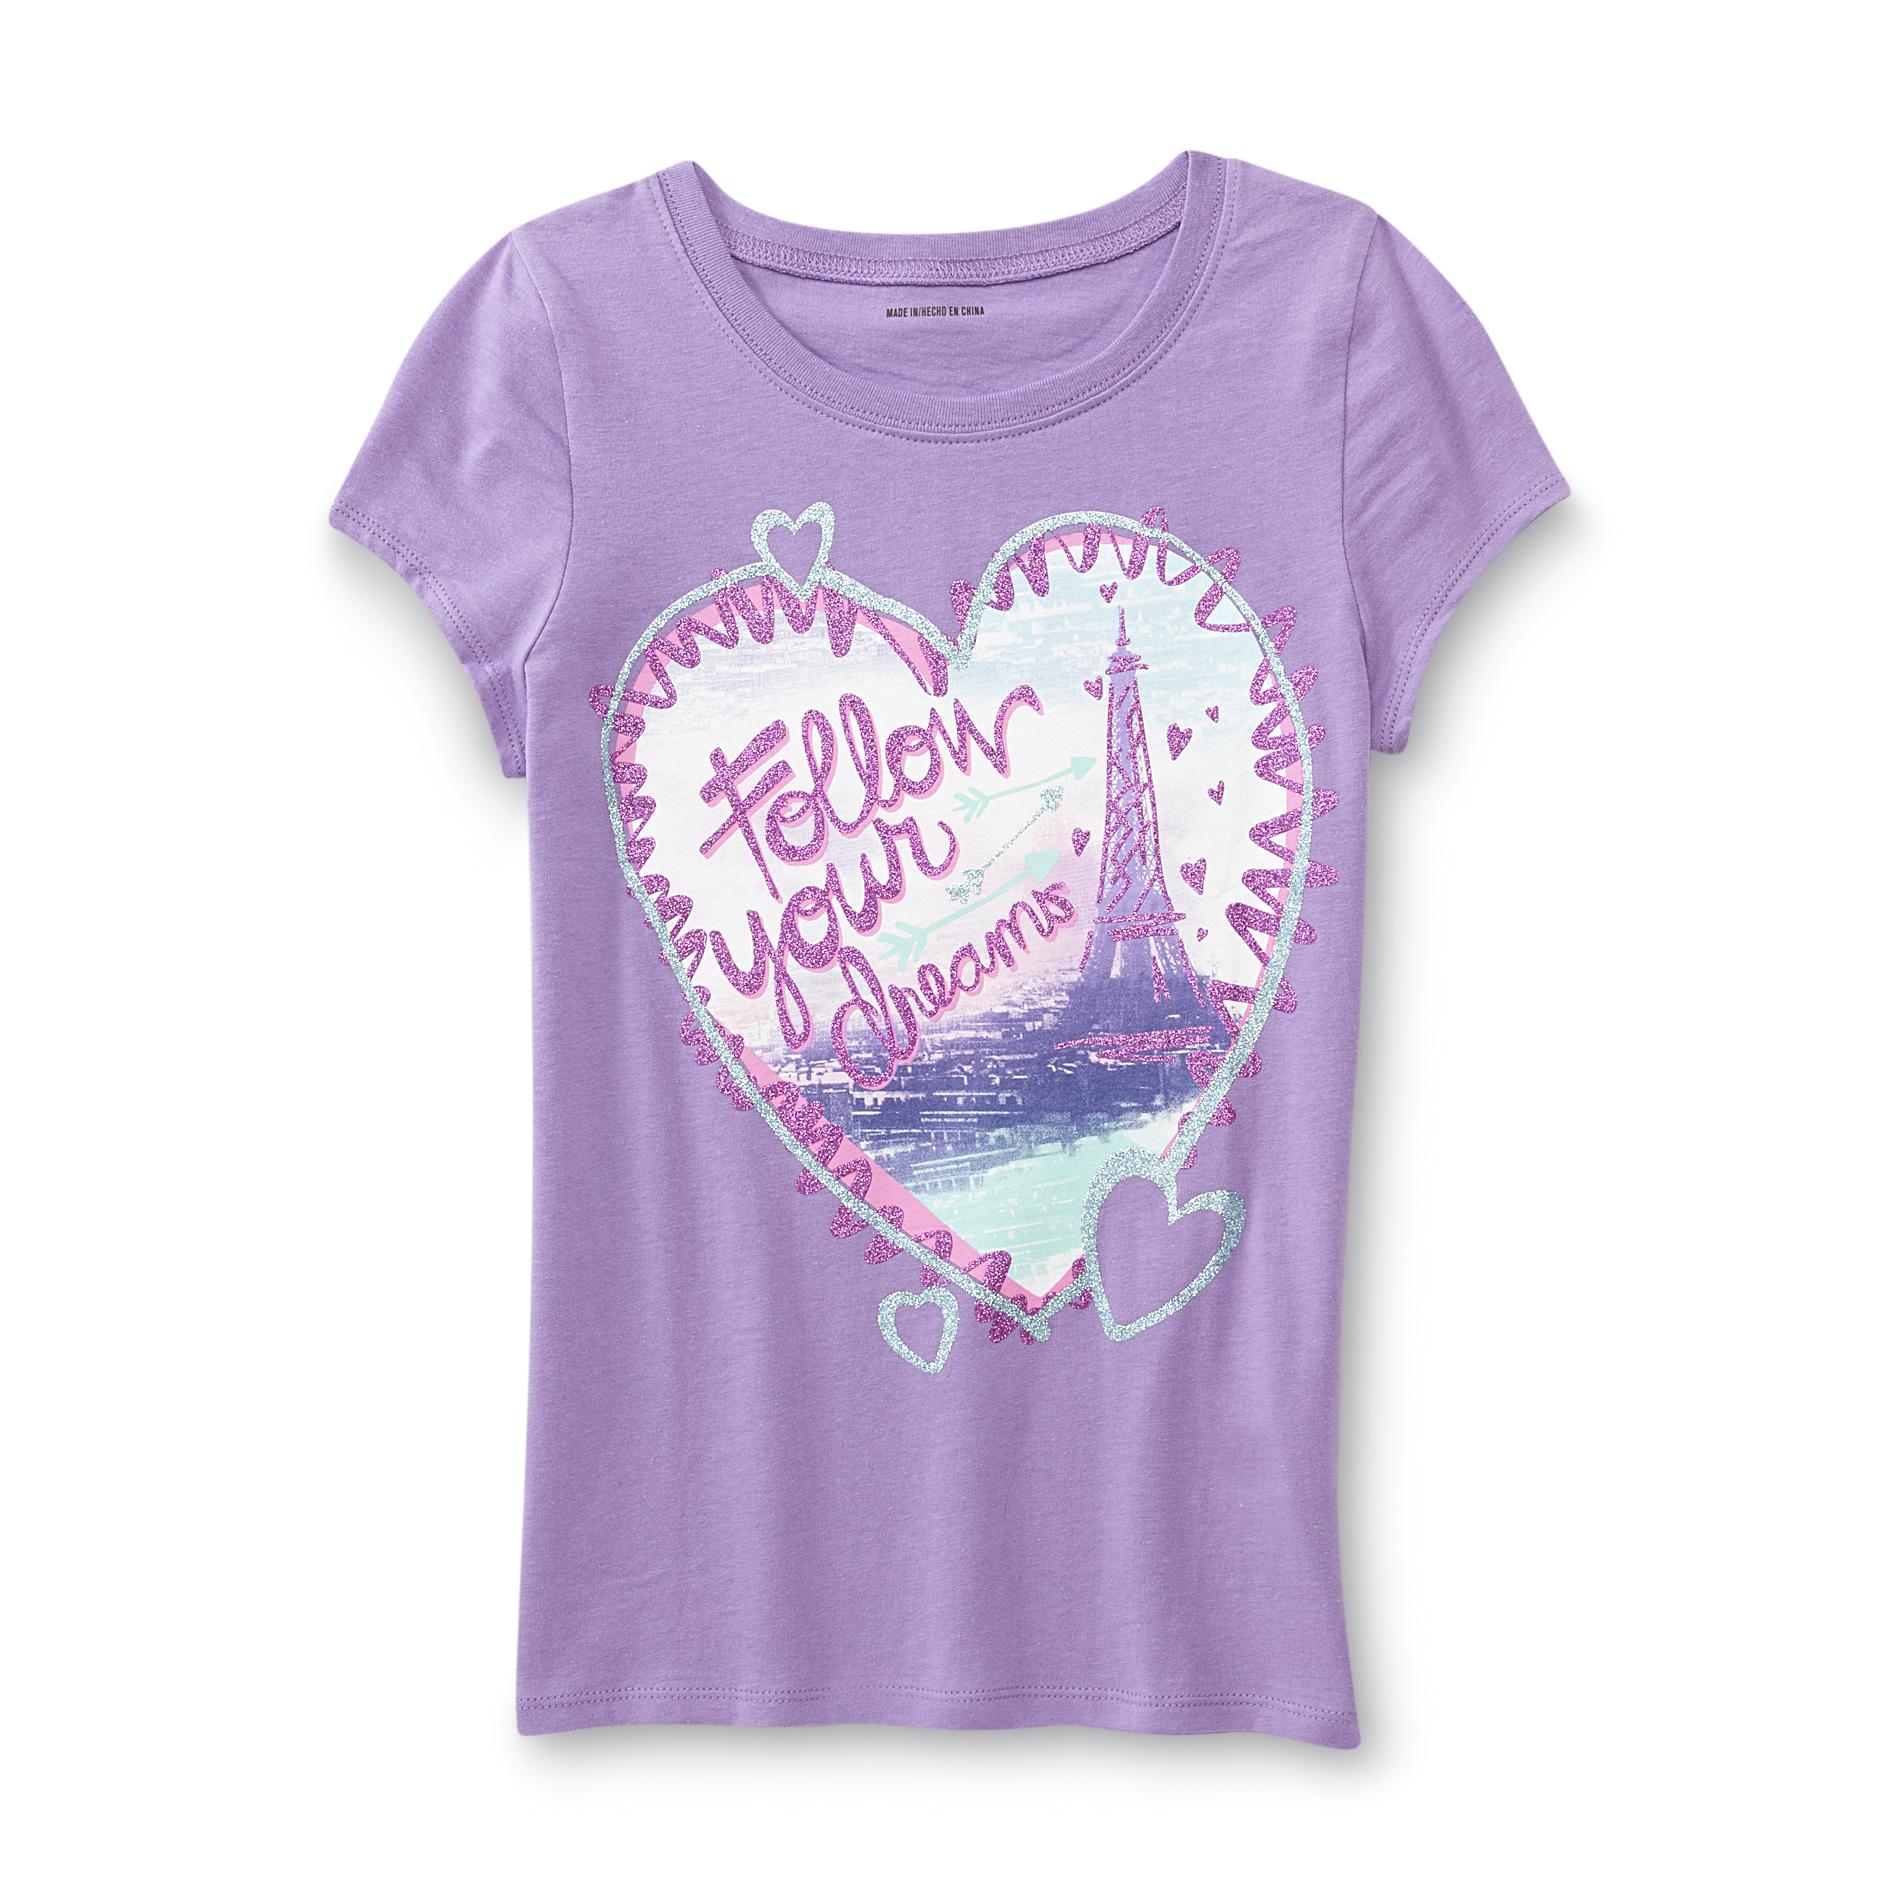 Girl's Graphic T-Shirt - Follow Your Dreams